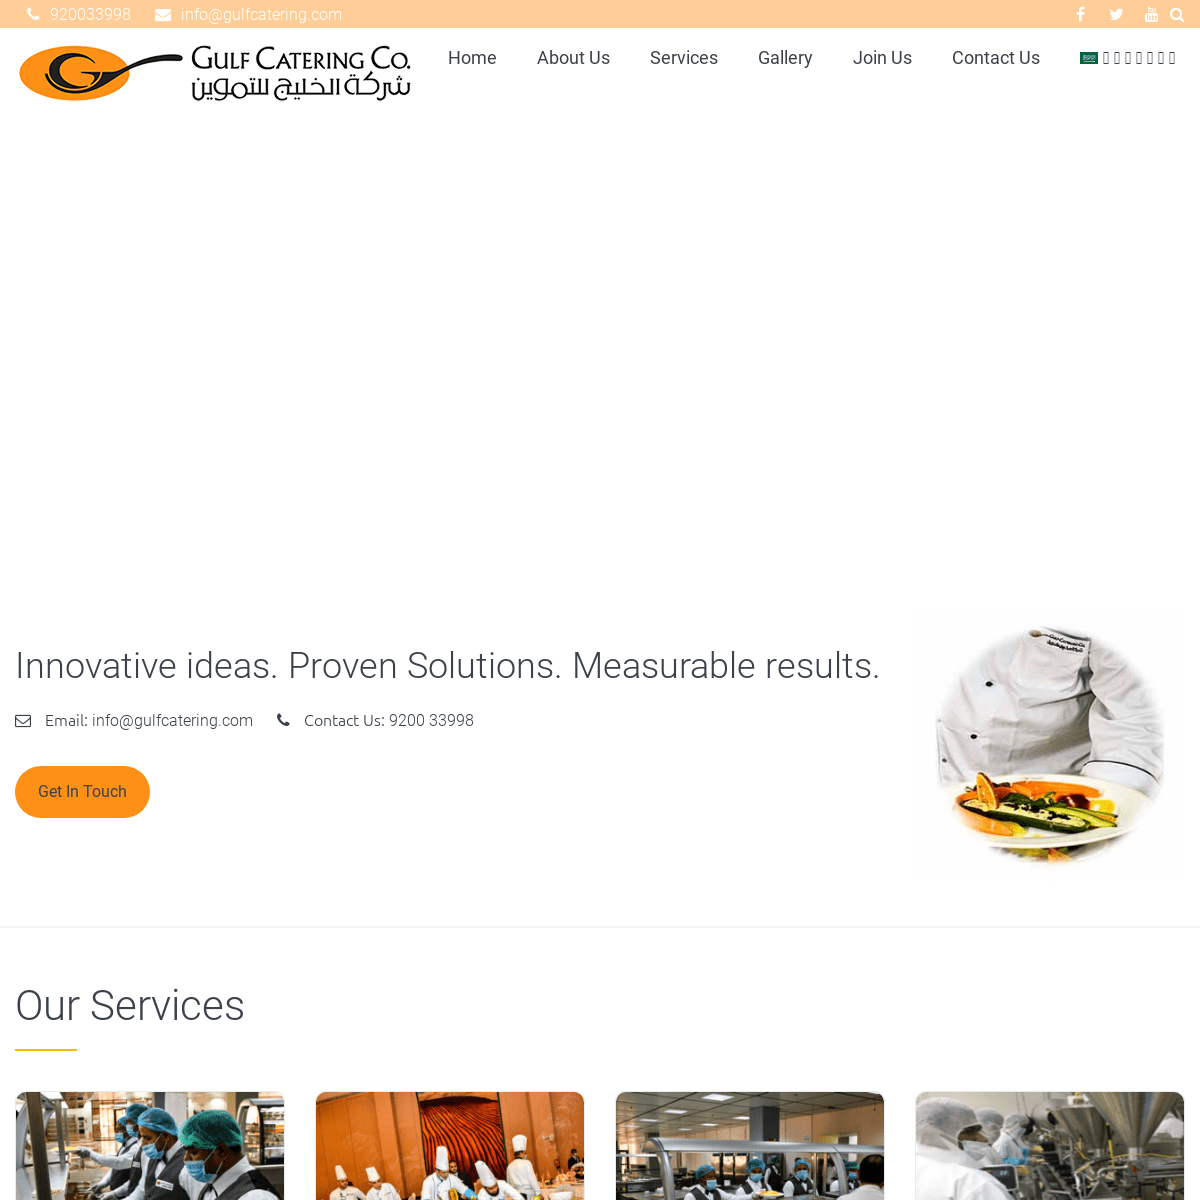 A complete backup of gulfcatering.com